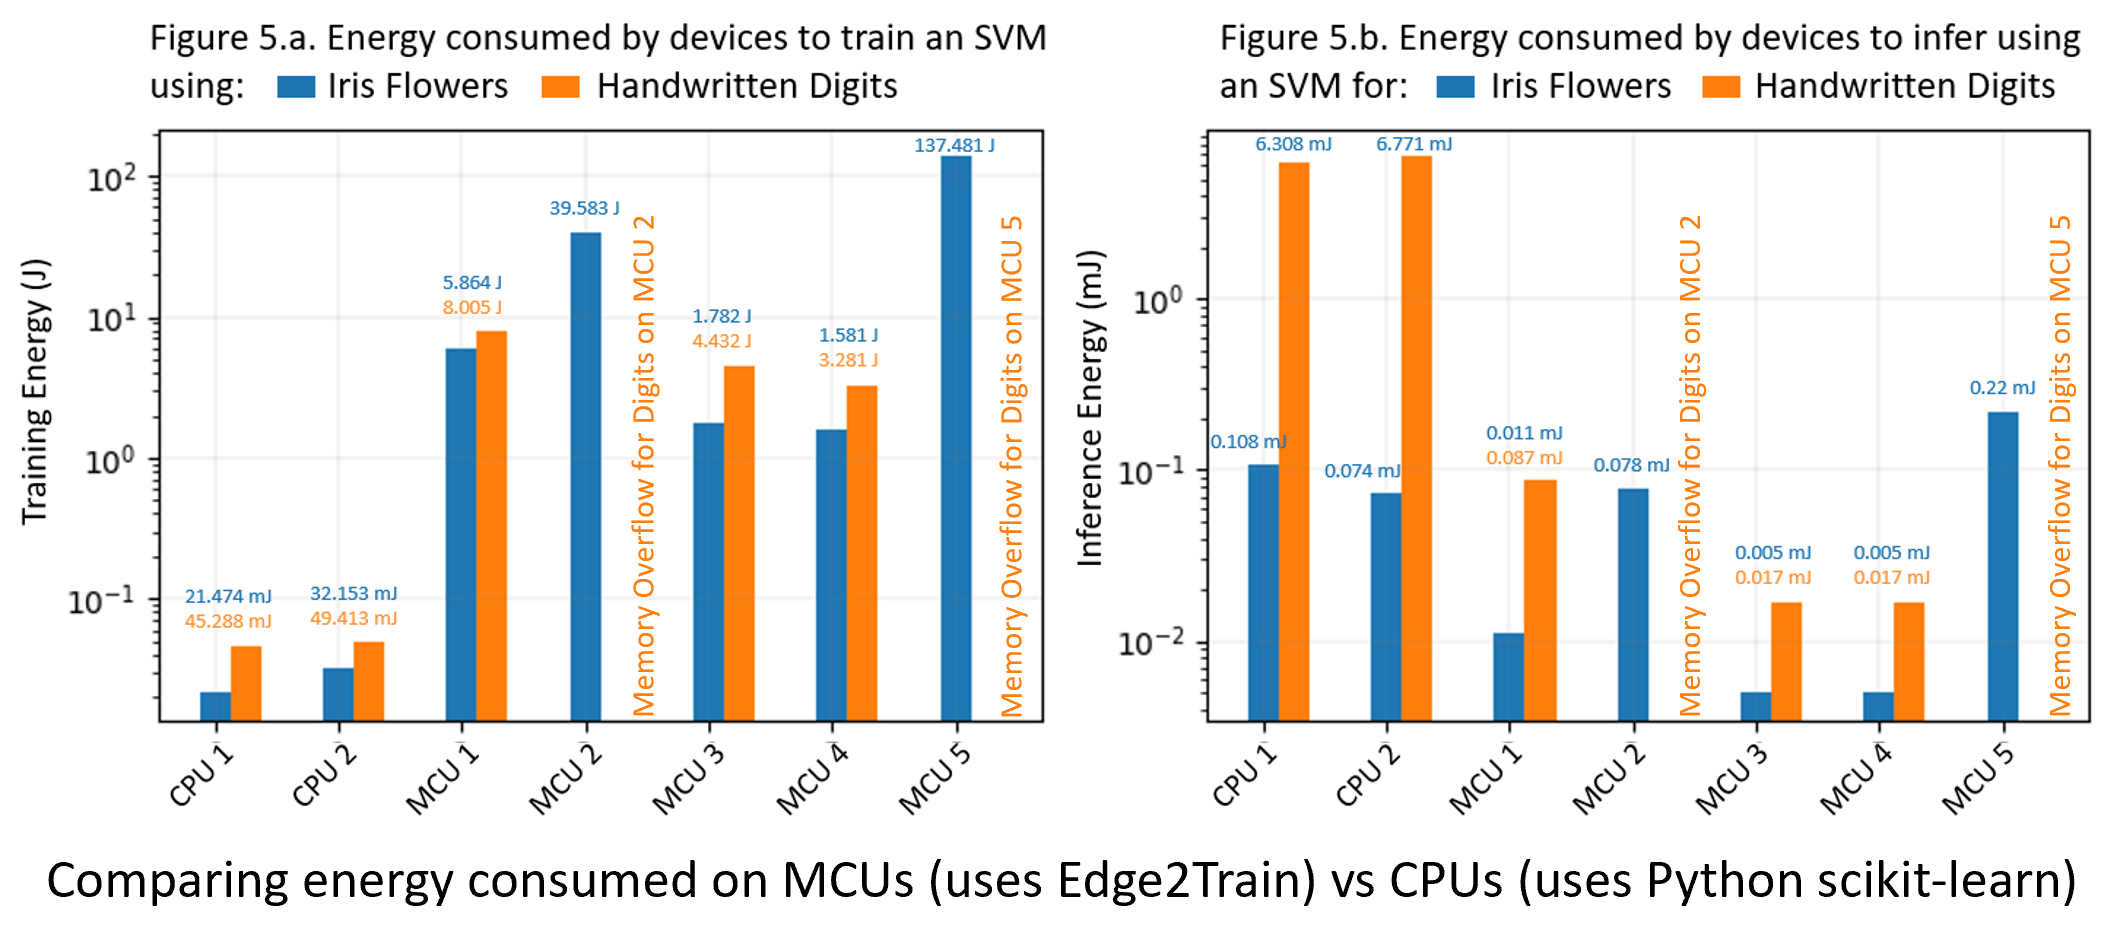 Train_and_infer_energy_on_mcus_and_cpus.png